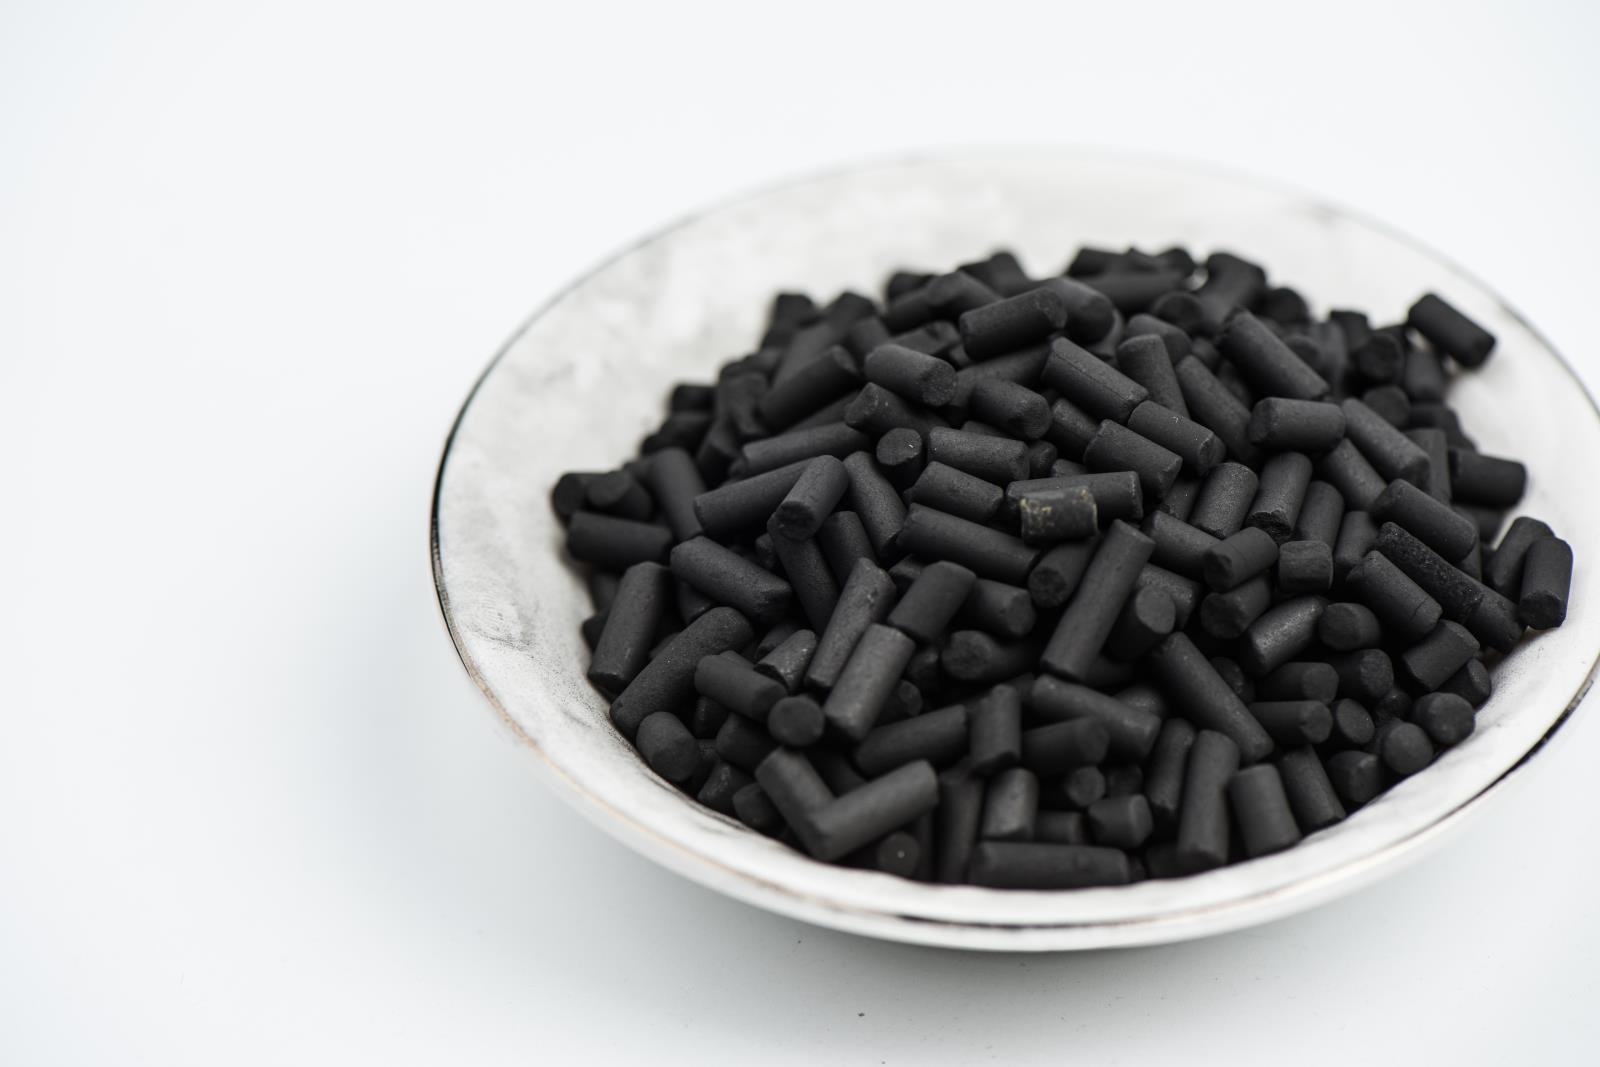  Industrial Catalytic Activated Carbon Black Apparent Density 400 - 600 G/L Synthetic Industry Manufactures